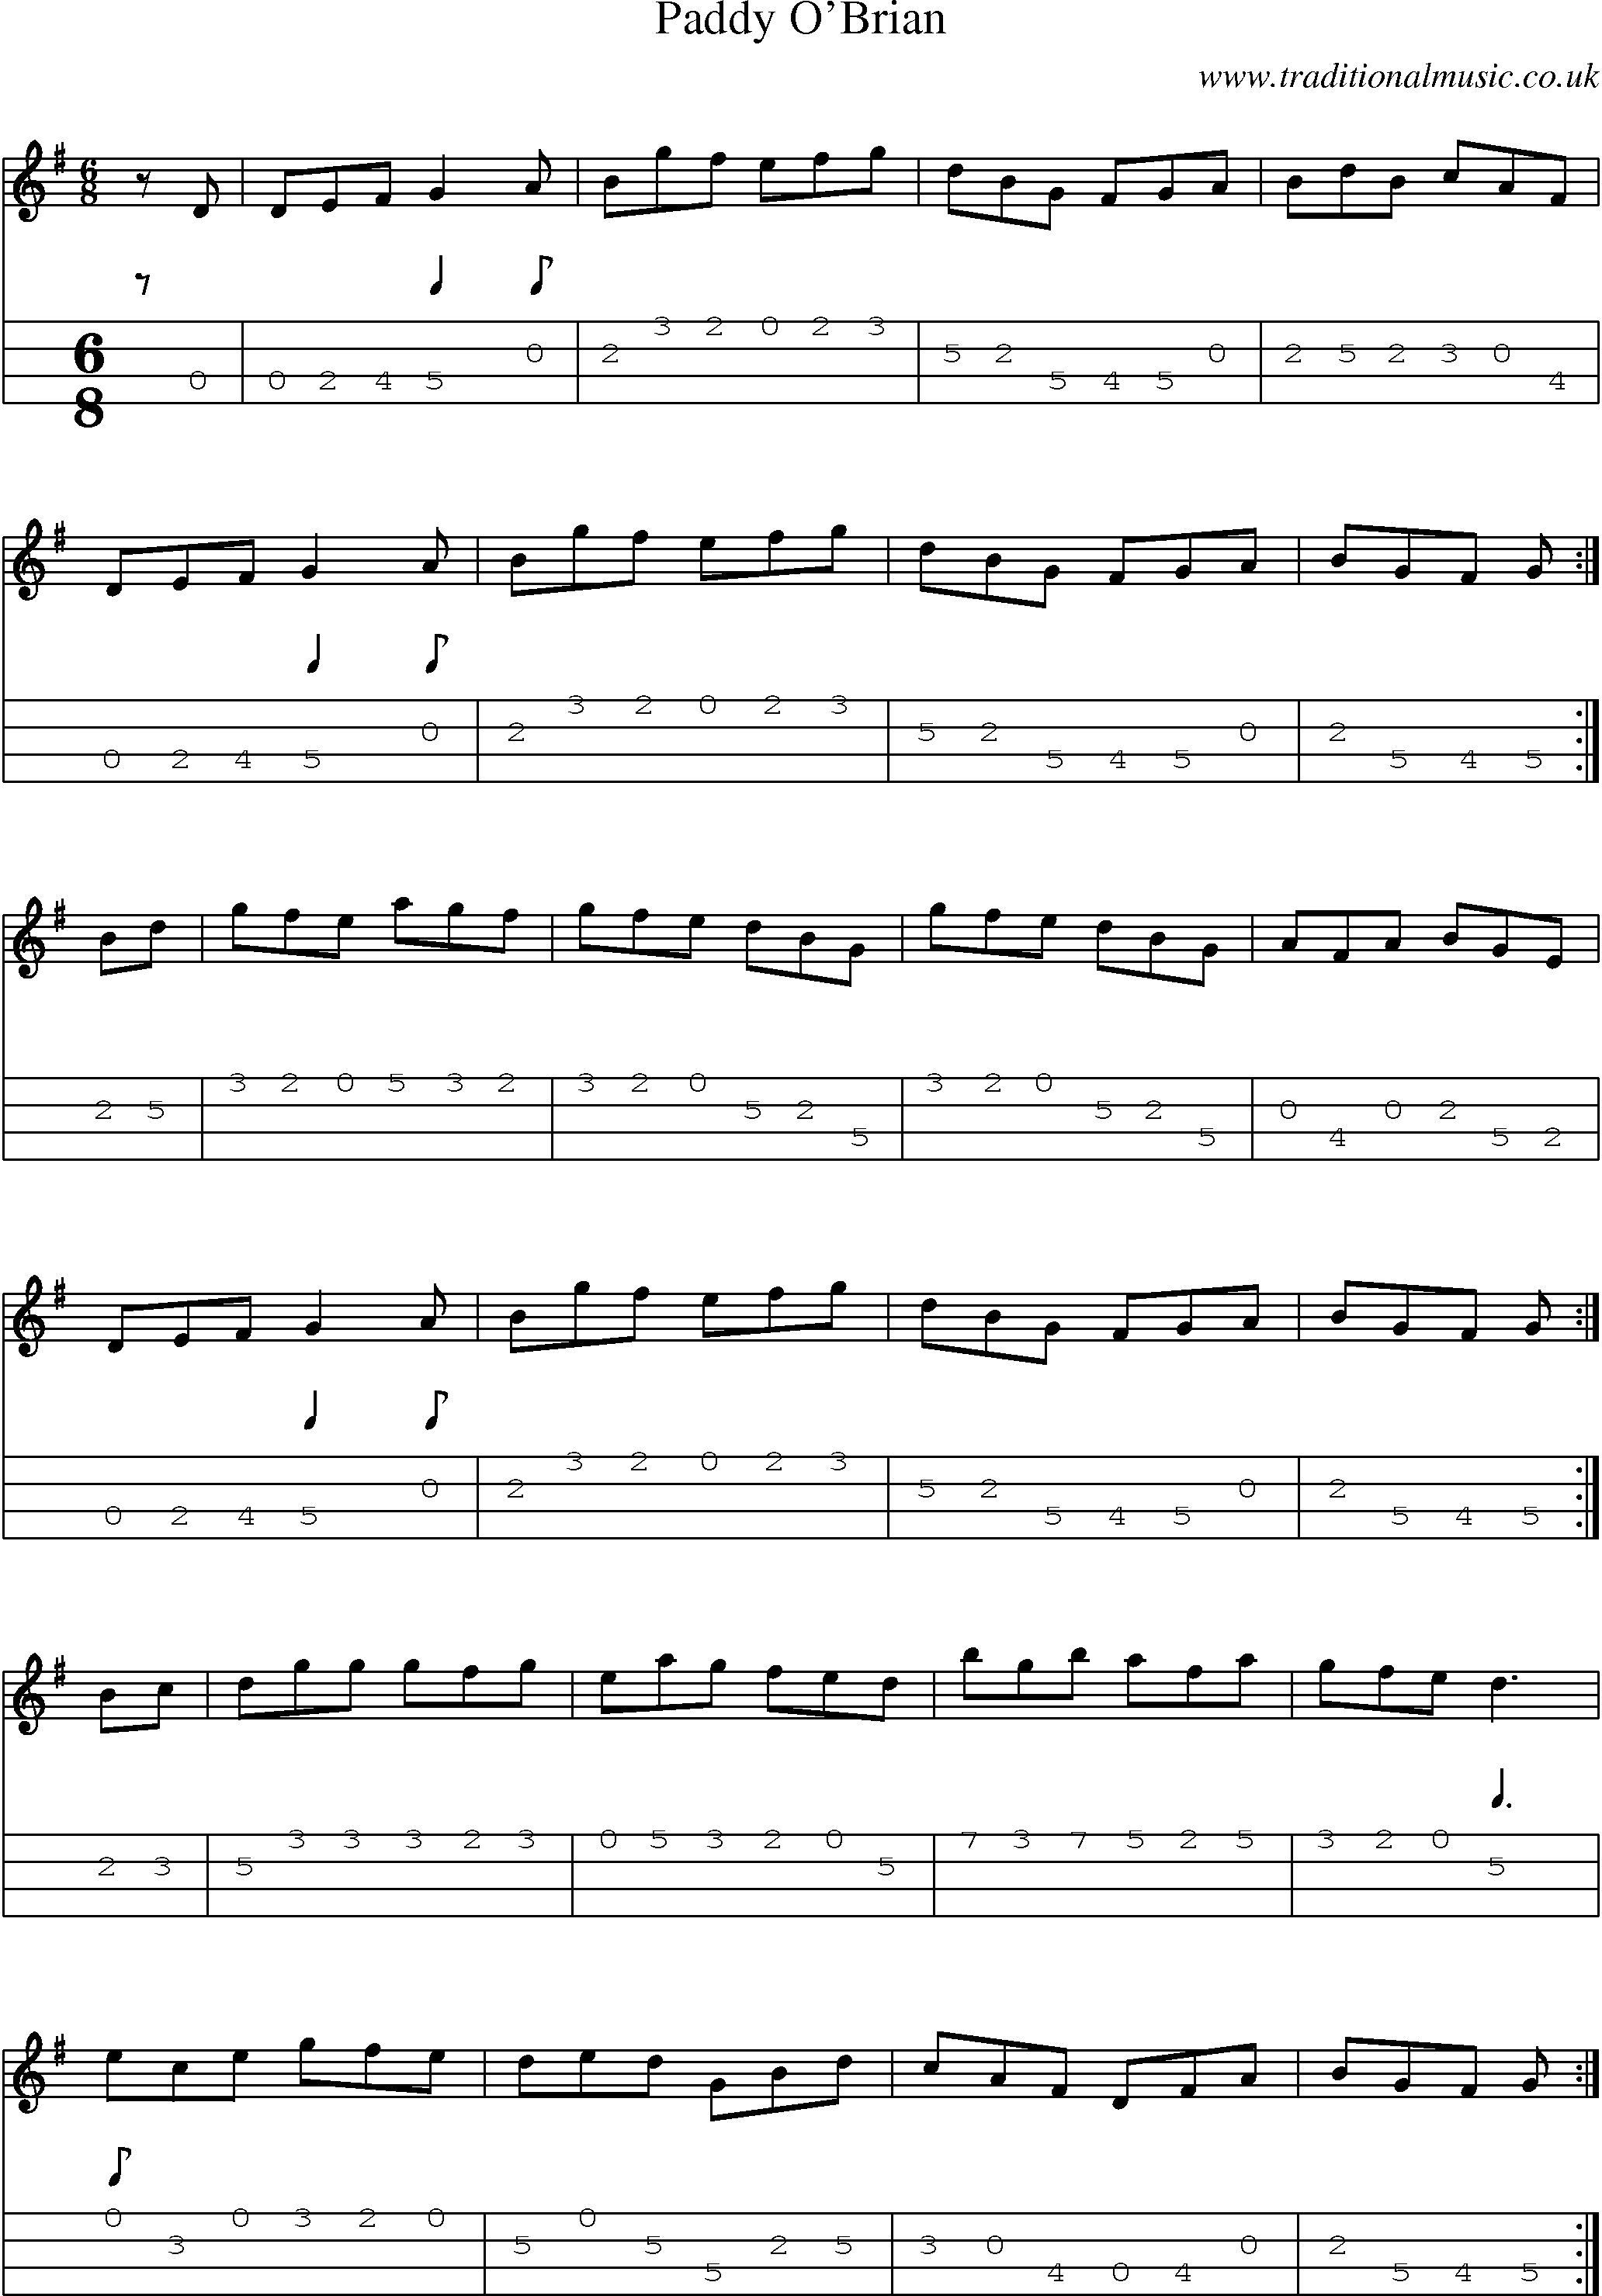 Music Score and Mandolin Tabs for Paddy Obrian